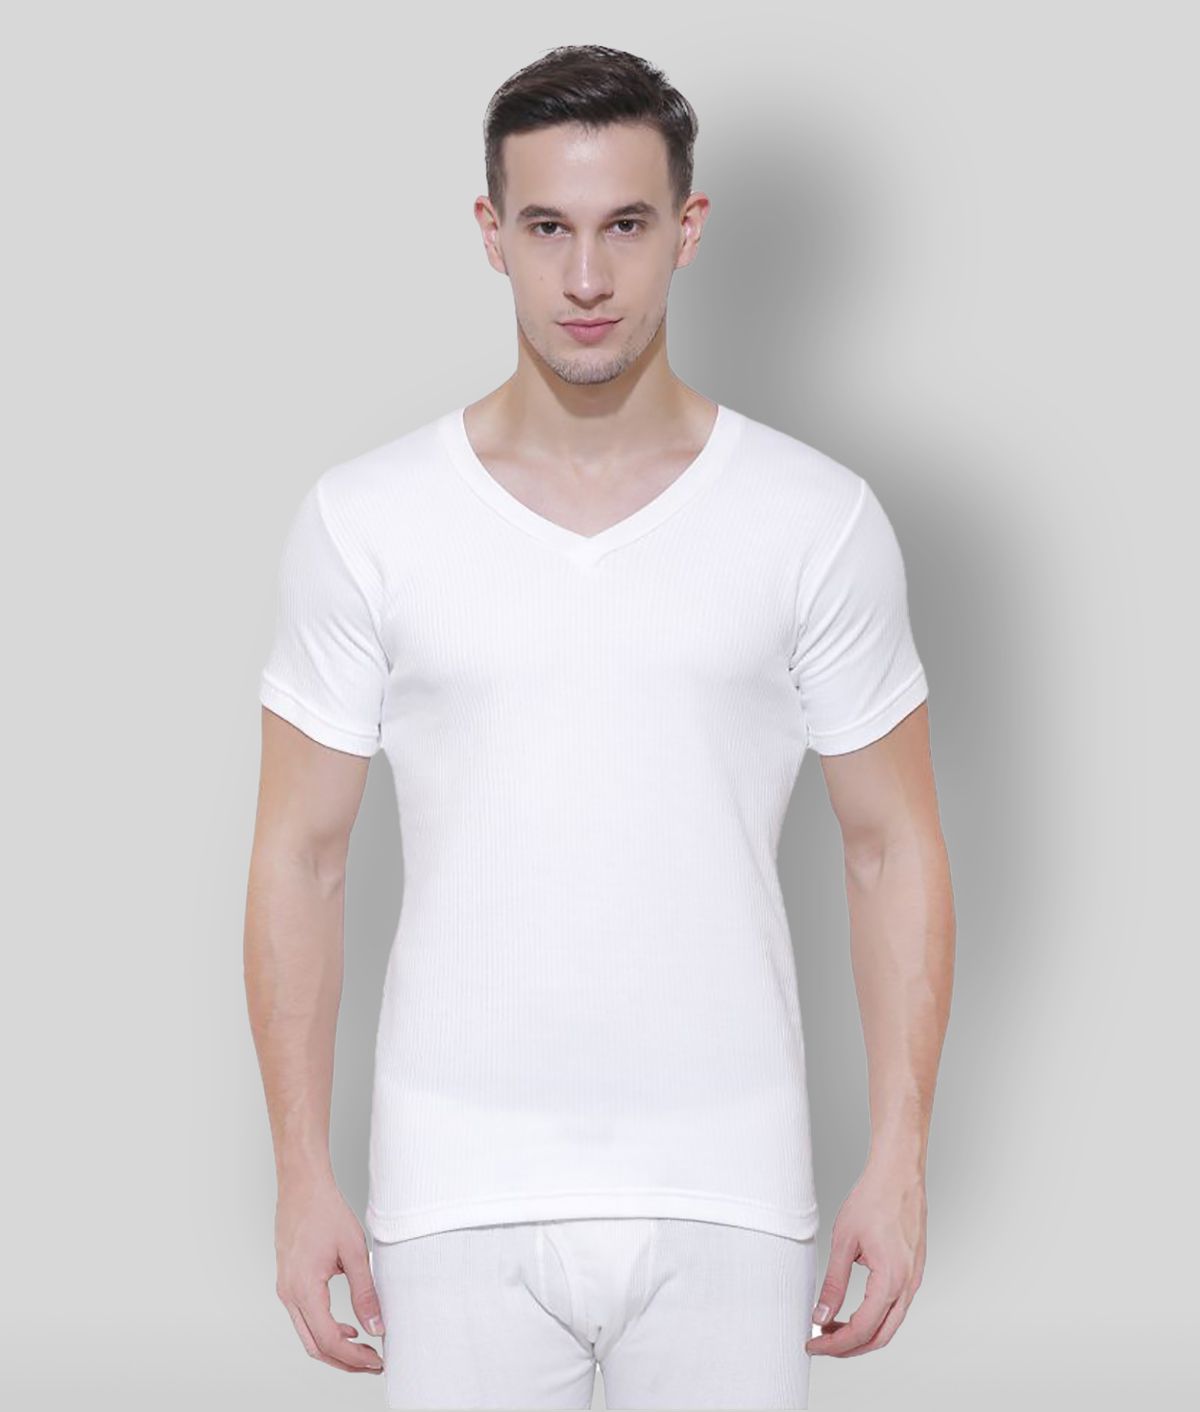     			Bodycare Insider - Off-White Cotton Blend Men's Thermal Tops ( Pack of 1 )